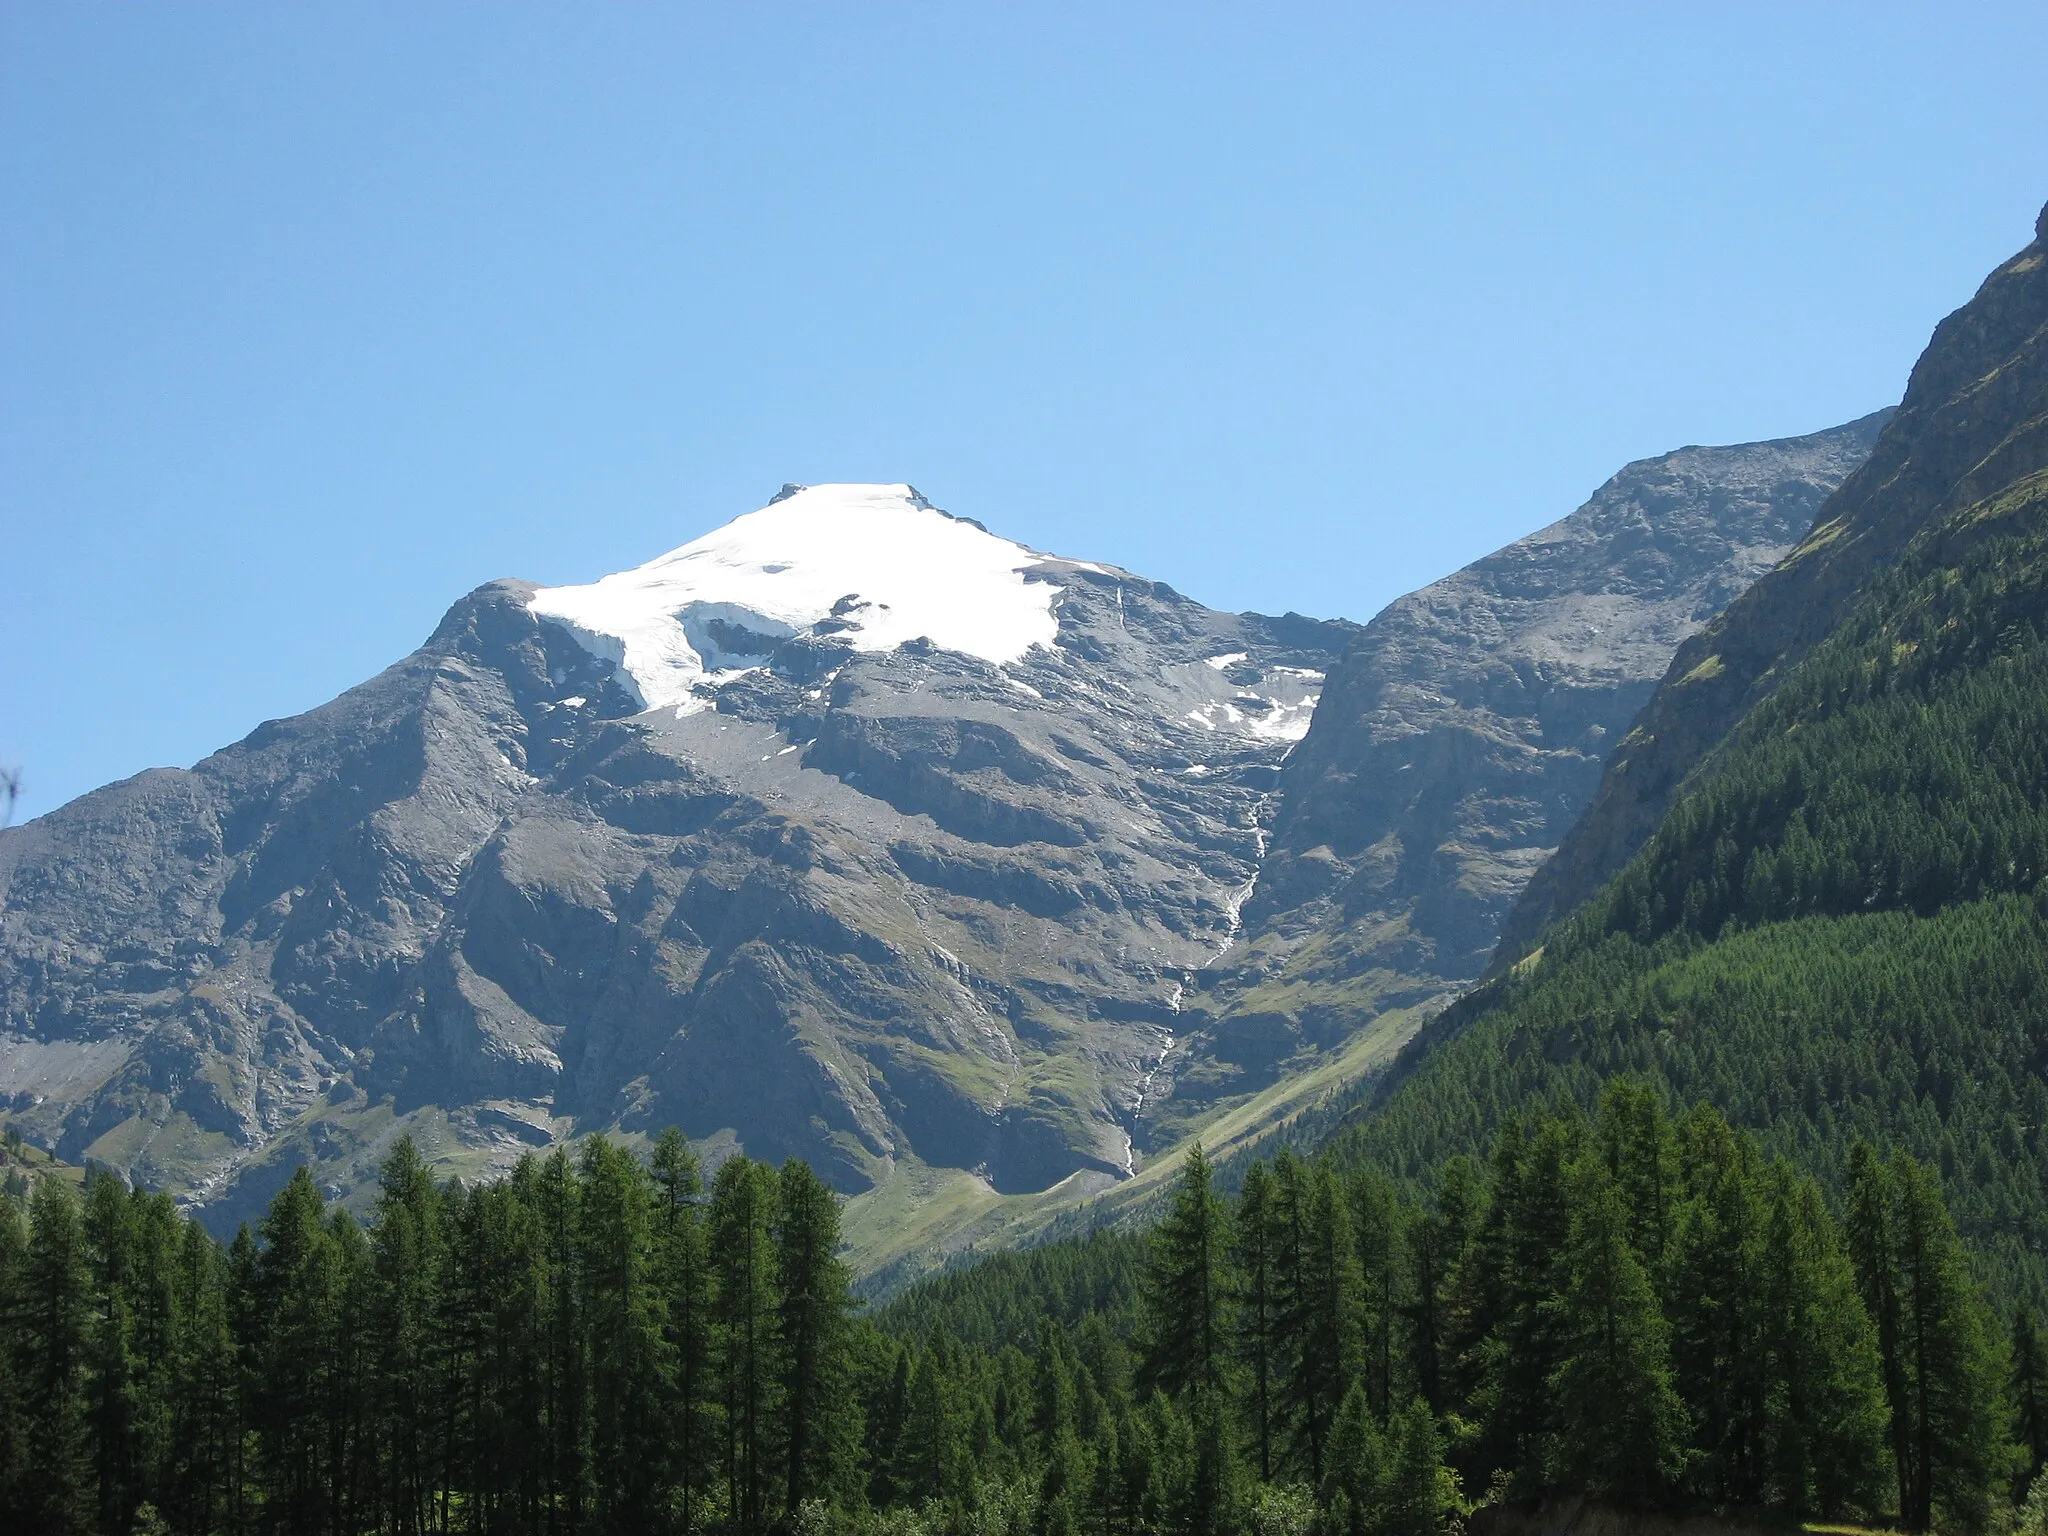 Photo showing: Pointe de Charbonnel taken from the parking of le Villaron in the Vallée de la Maurienne

Pointe de Charbonnel Position: Map: 45° 16' 51" N 7° 3' 20" E
Camera Position: Camera location 45° 19′ 55″ N, 7° 00′ 52″ E View this and other nearby images on: OpenStreetMap 45.331944;    7.014444